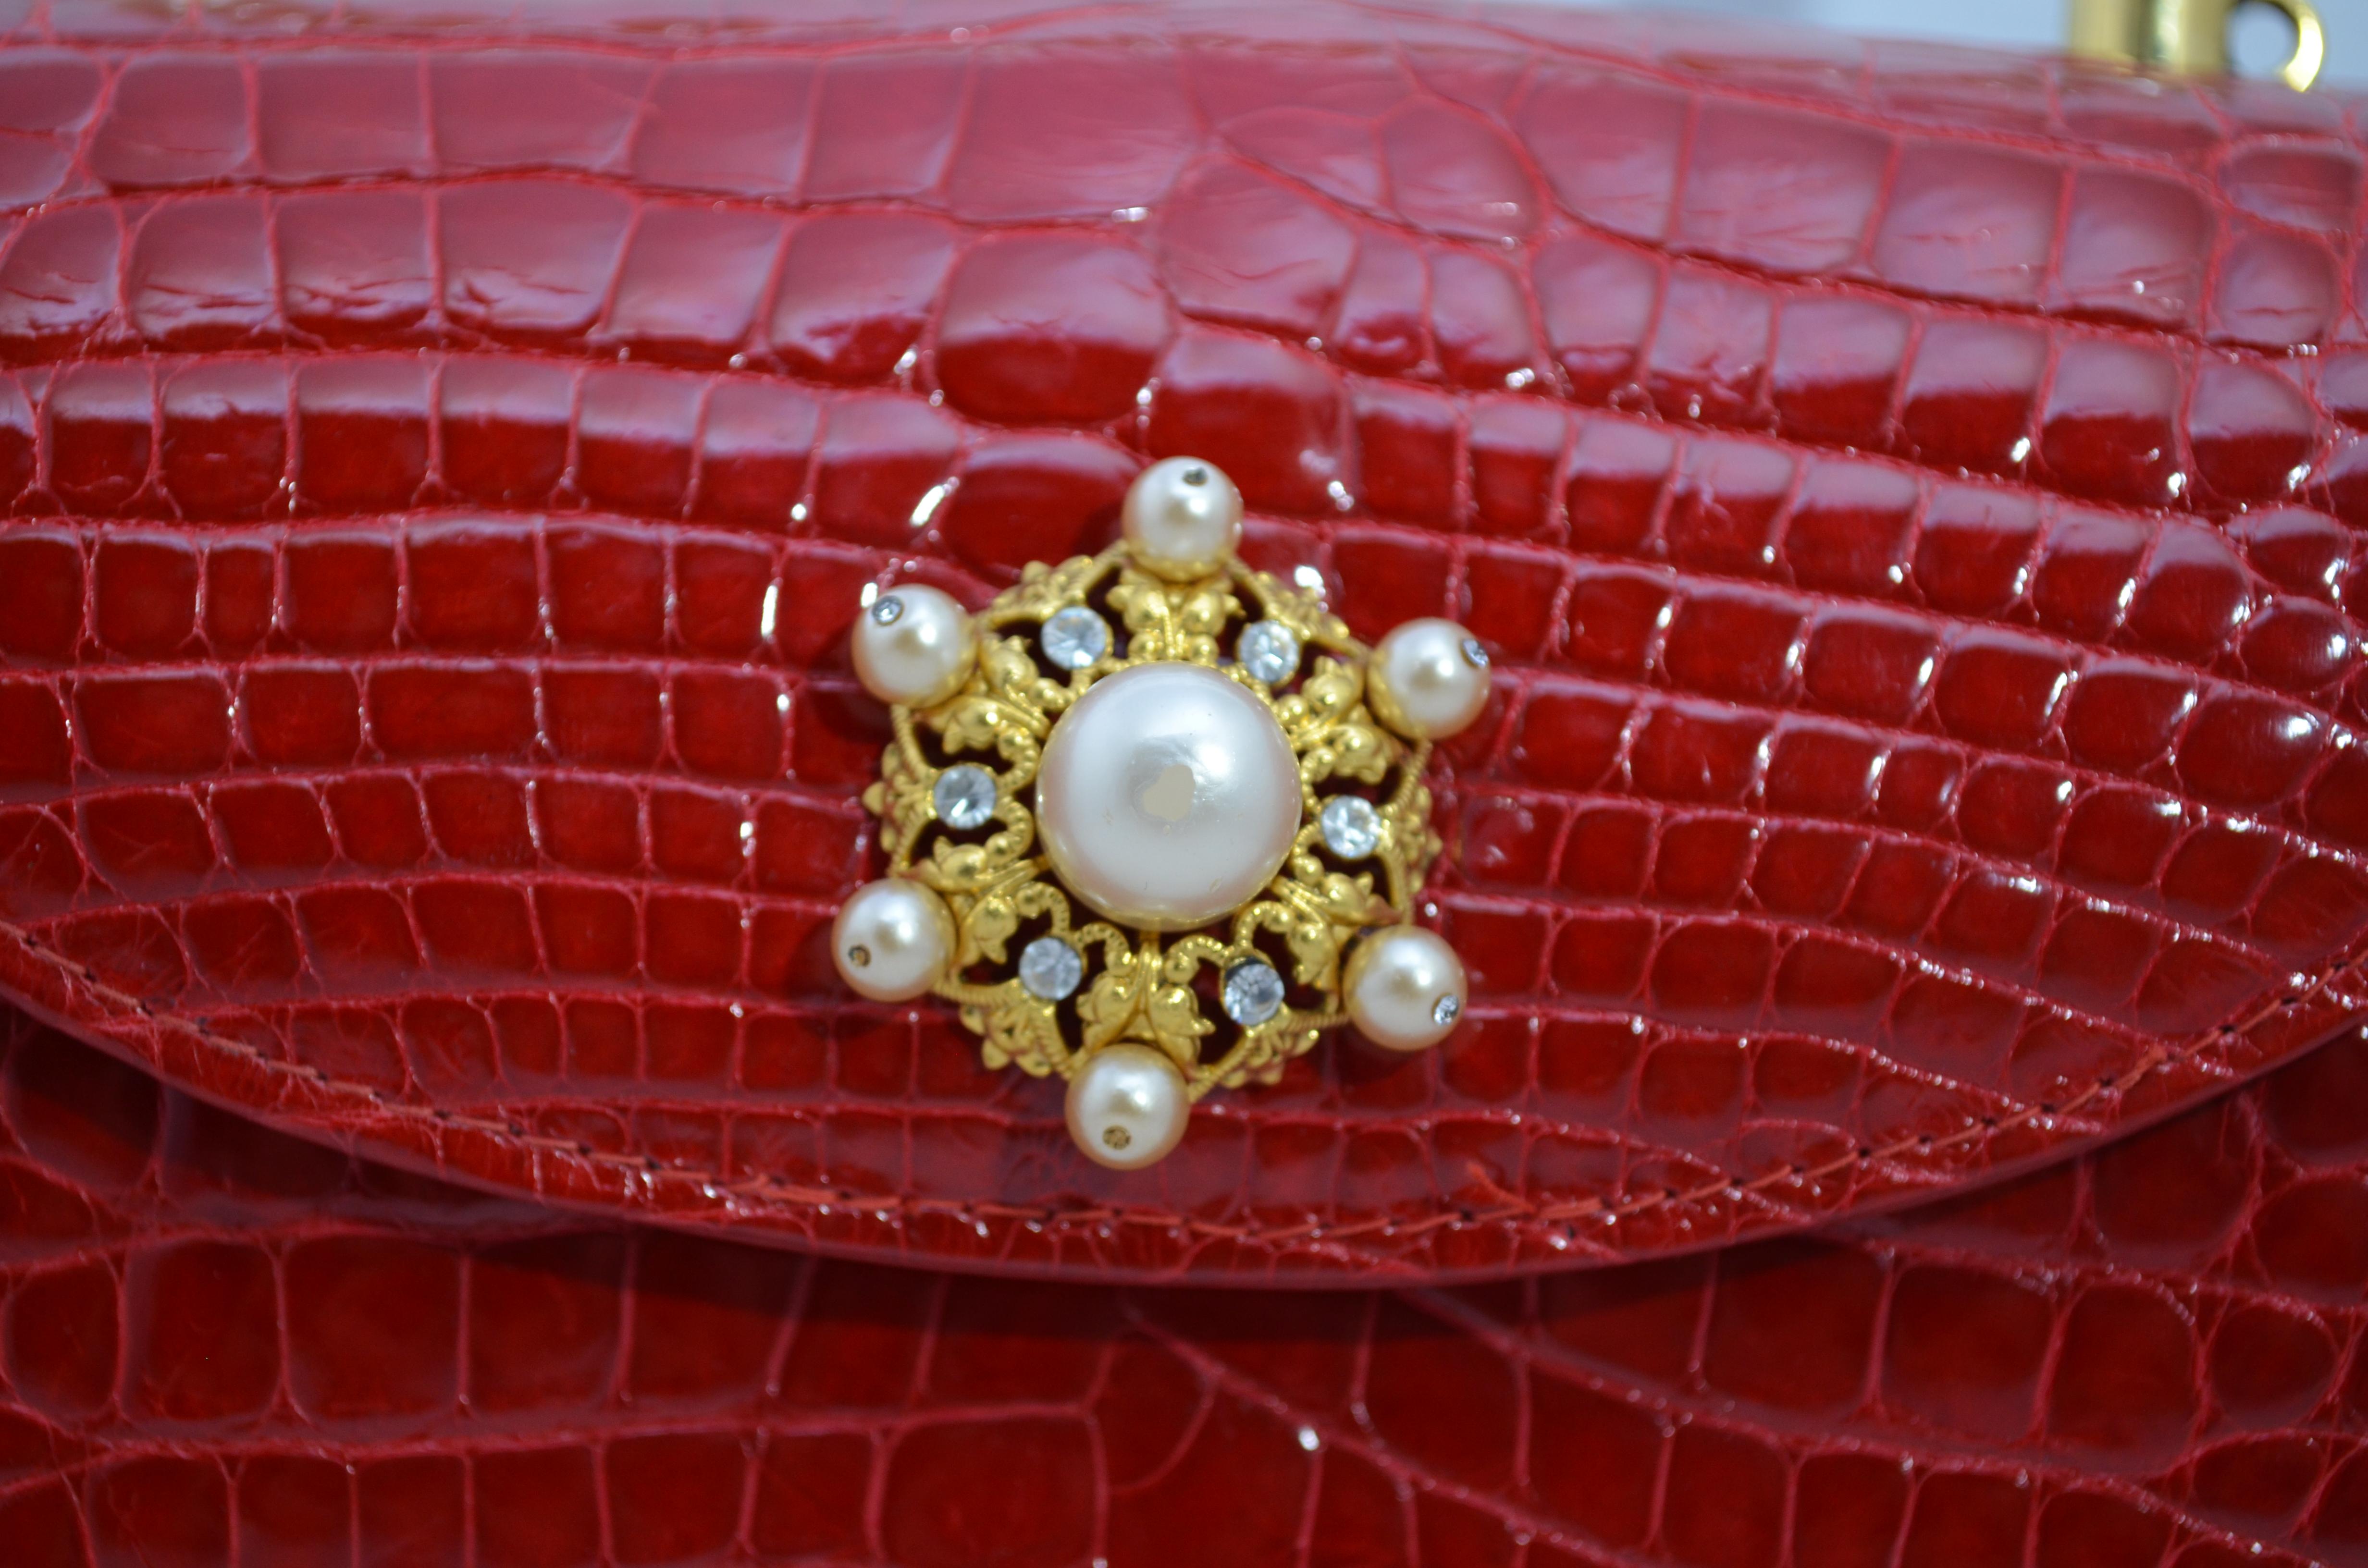 Women's Lana Marks Red Alligator Purse with Pearl Handle